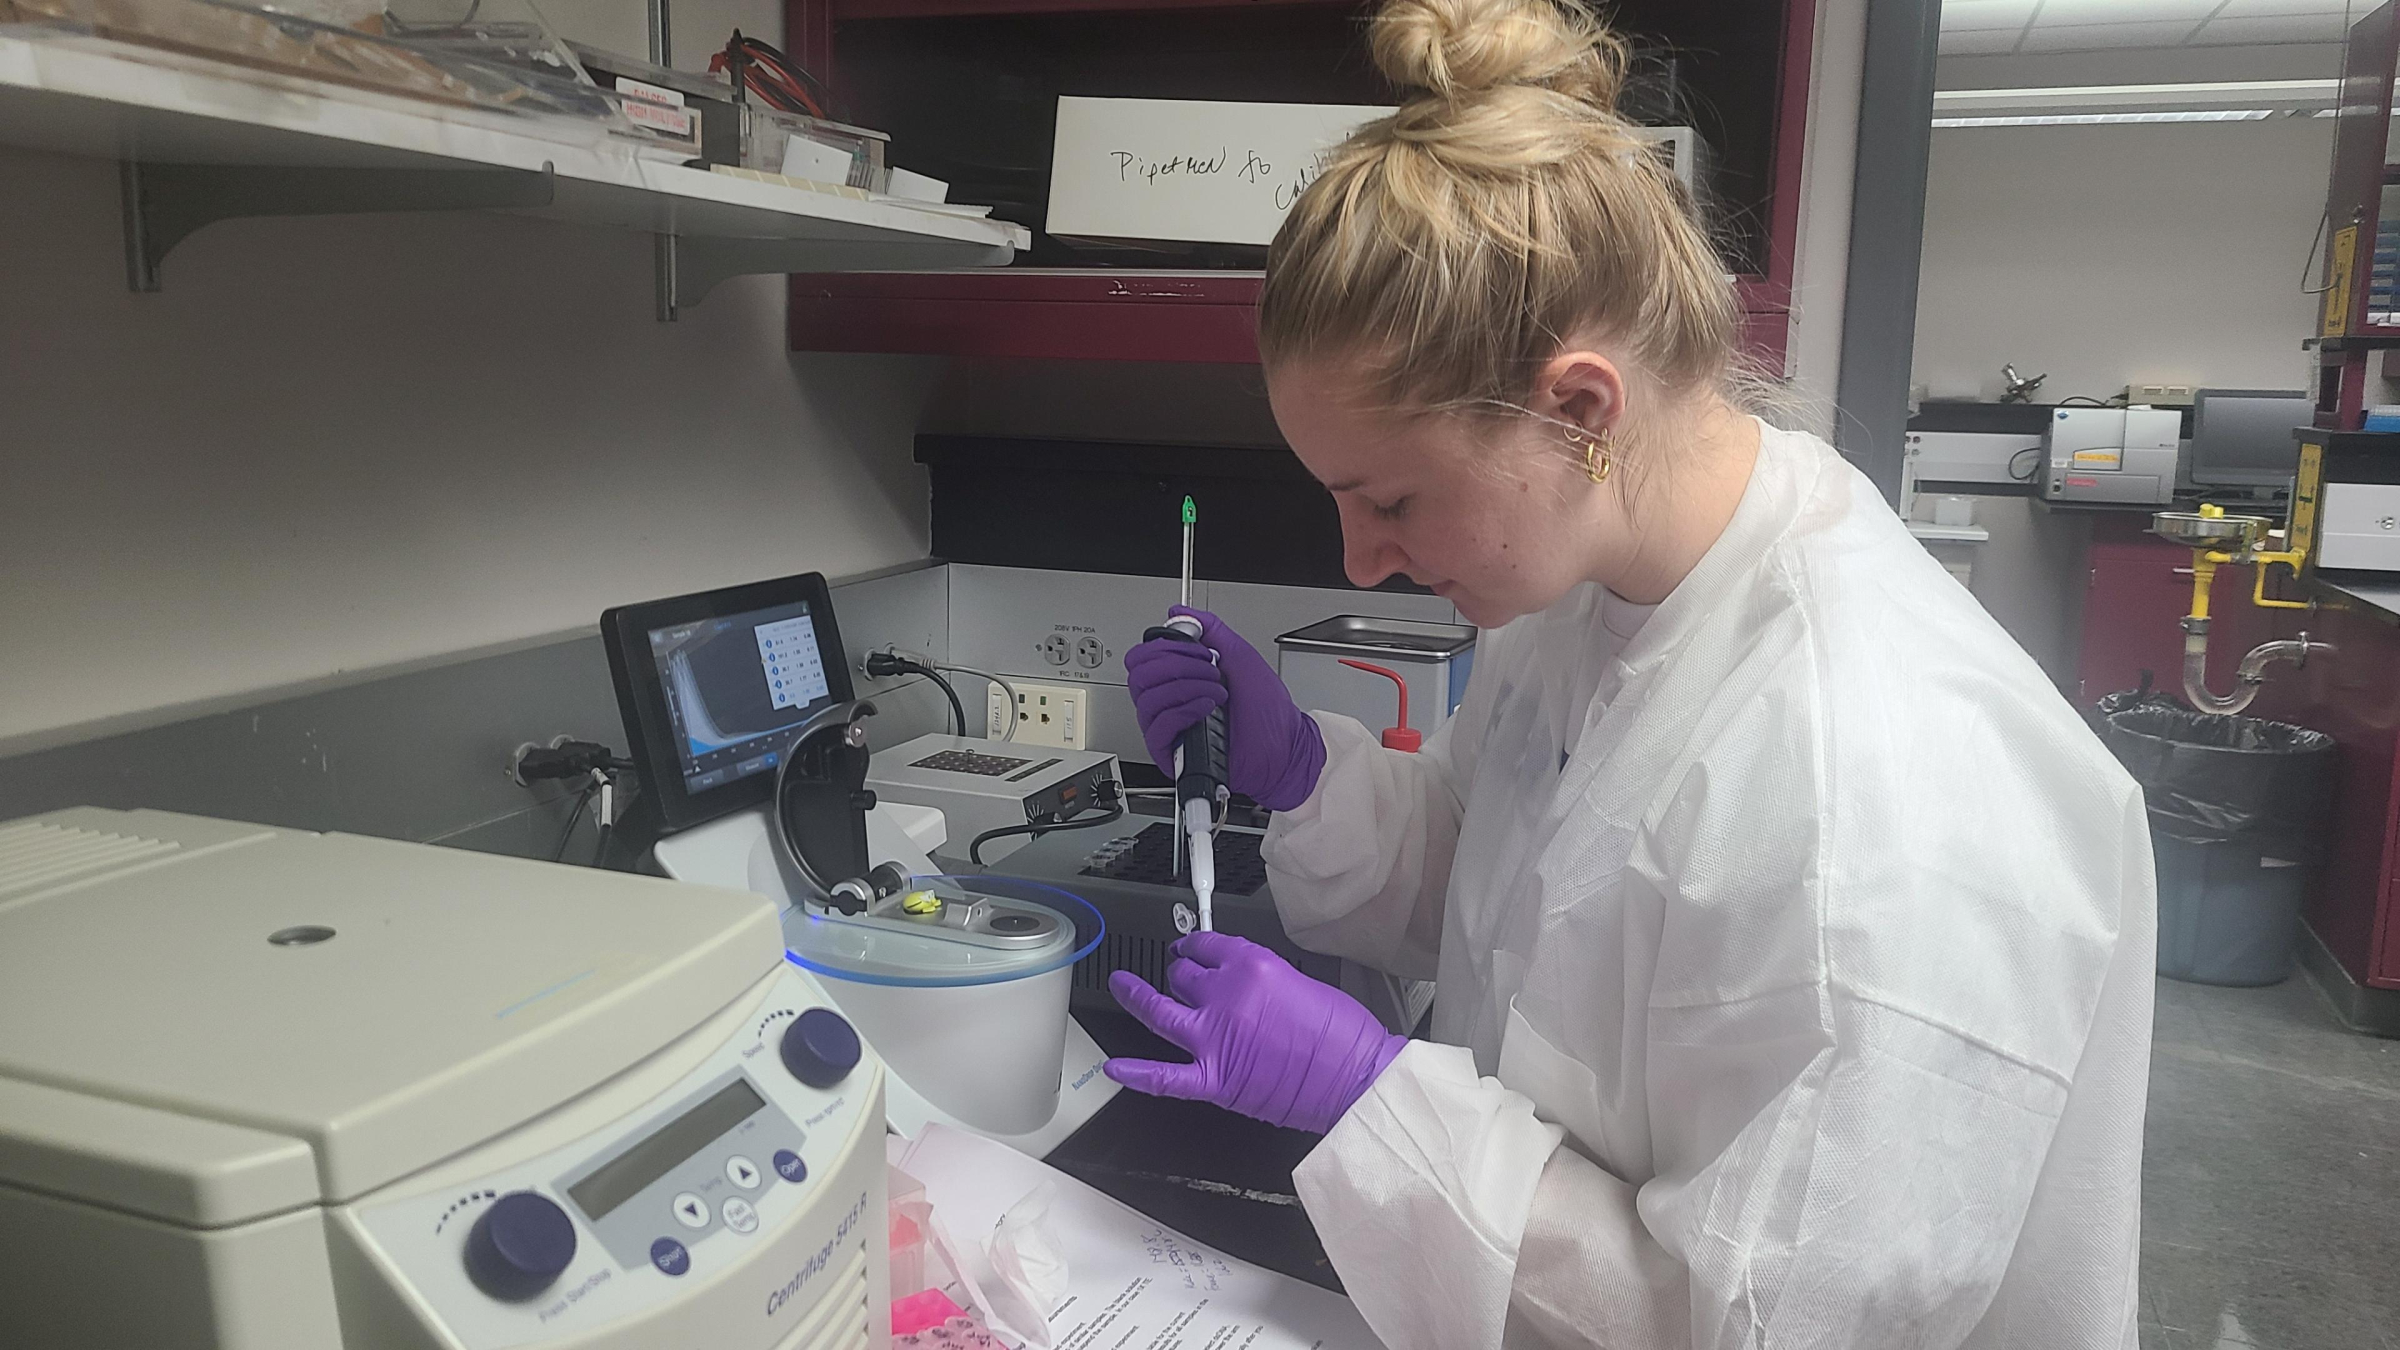 Forensic student using a NanoDrop to measure amounts of DNA.